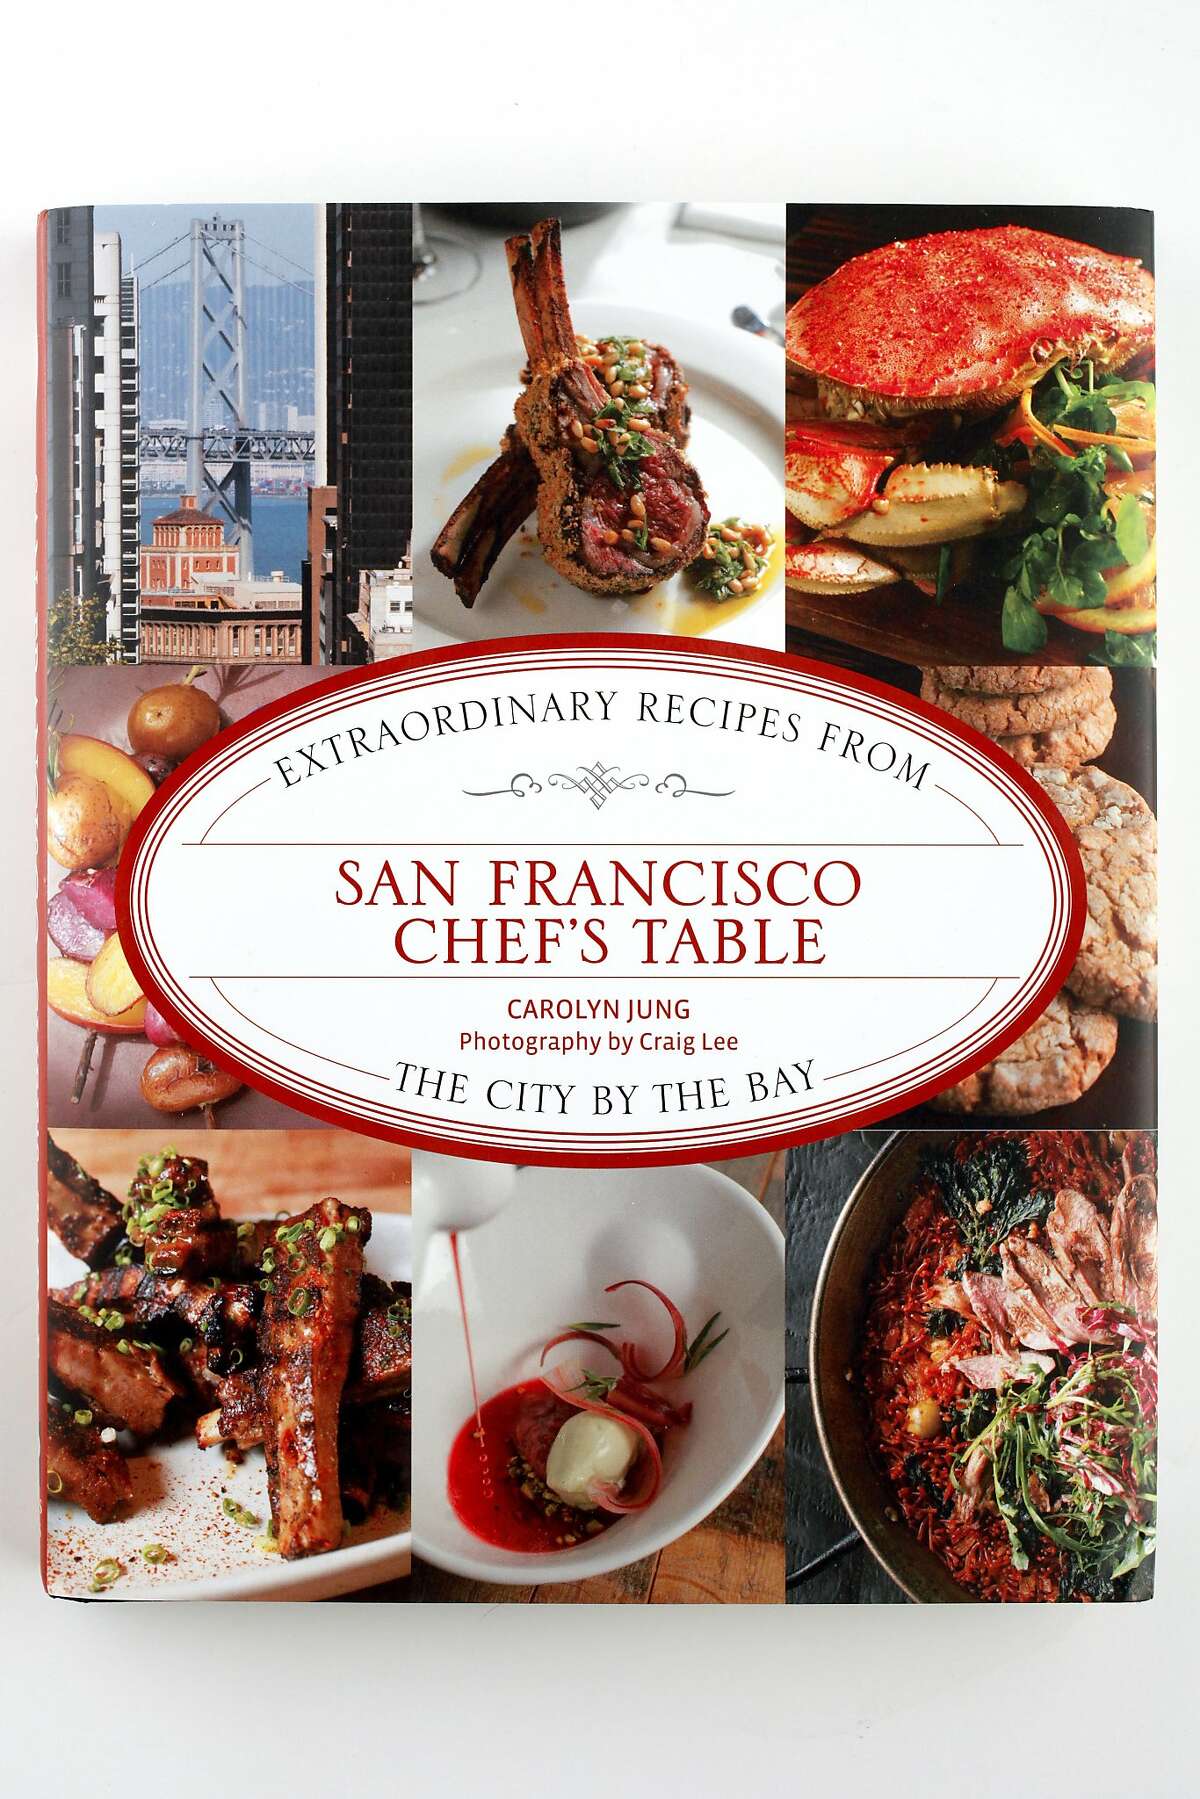 Carolyn Jung's new book "San Francisco Chef's Table: Extraordinary Recipes from the City by the Bay" as seen in San Francisco, California on Wednesday April 23, 2014.